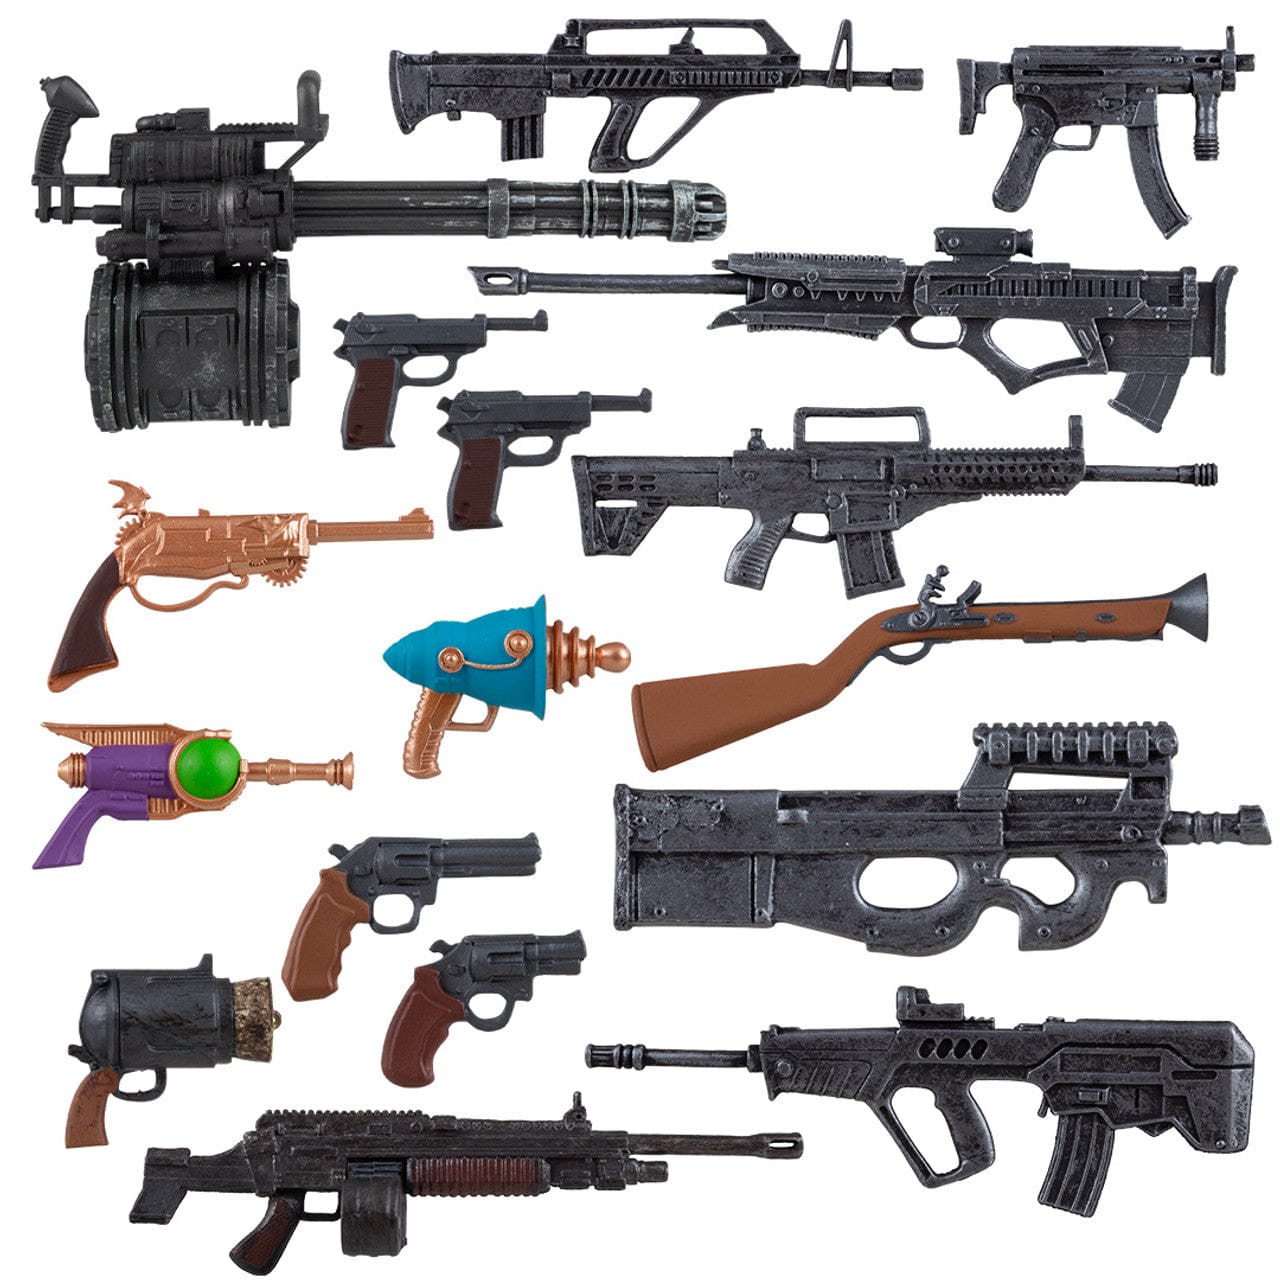 McFarlane Toys McFarlane Toys Accessory Pack #2 Weapons Guns 17 Piece for 7-inch 1:10 Scale